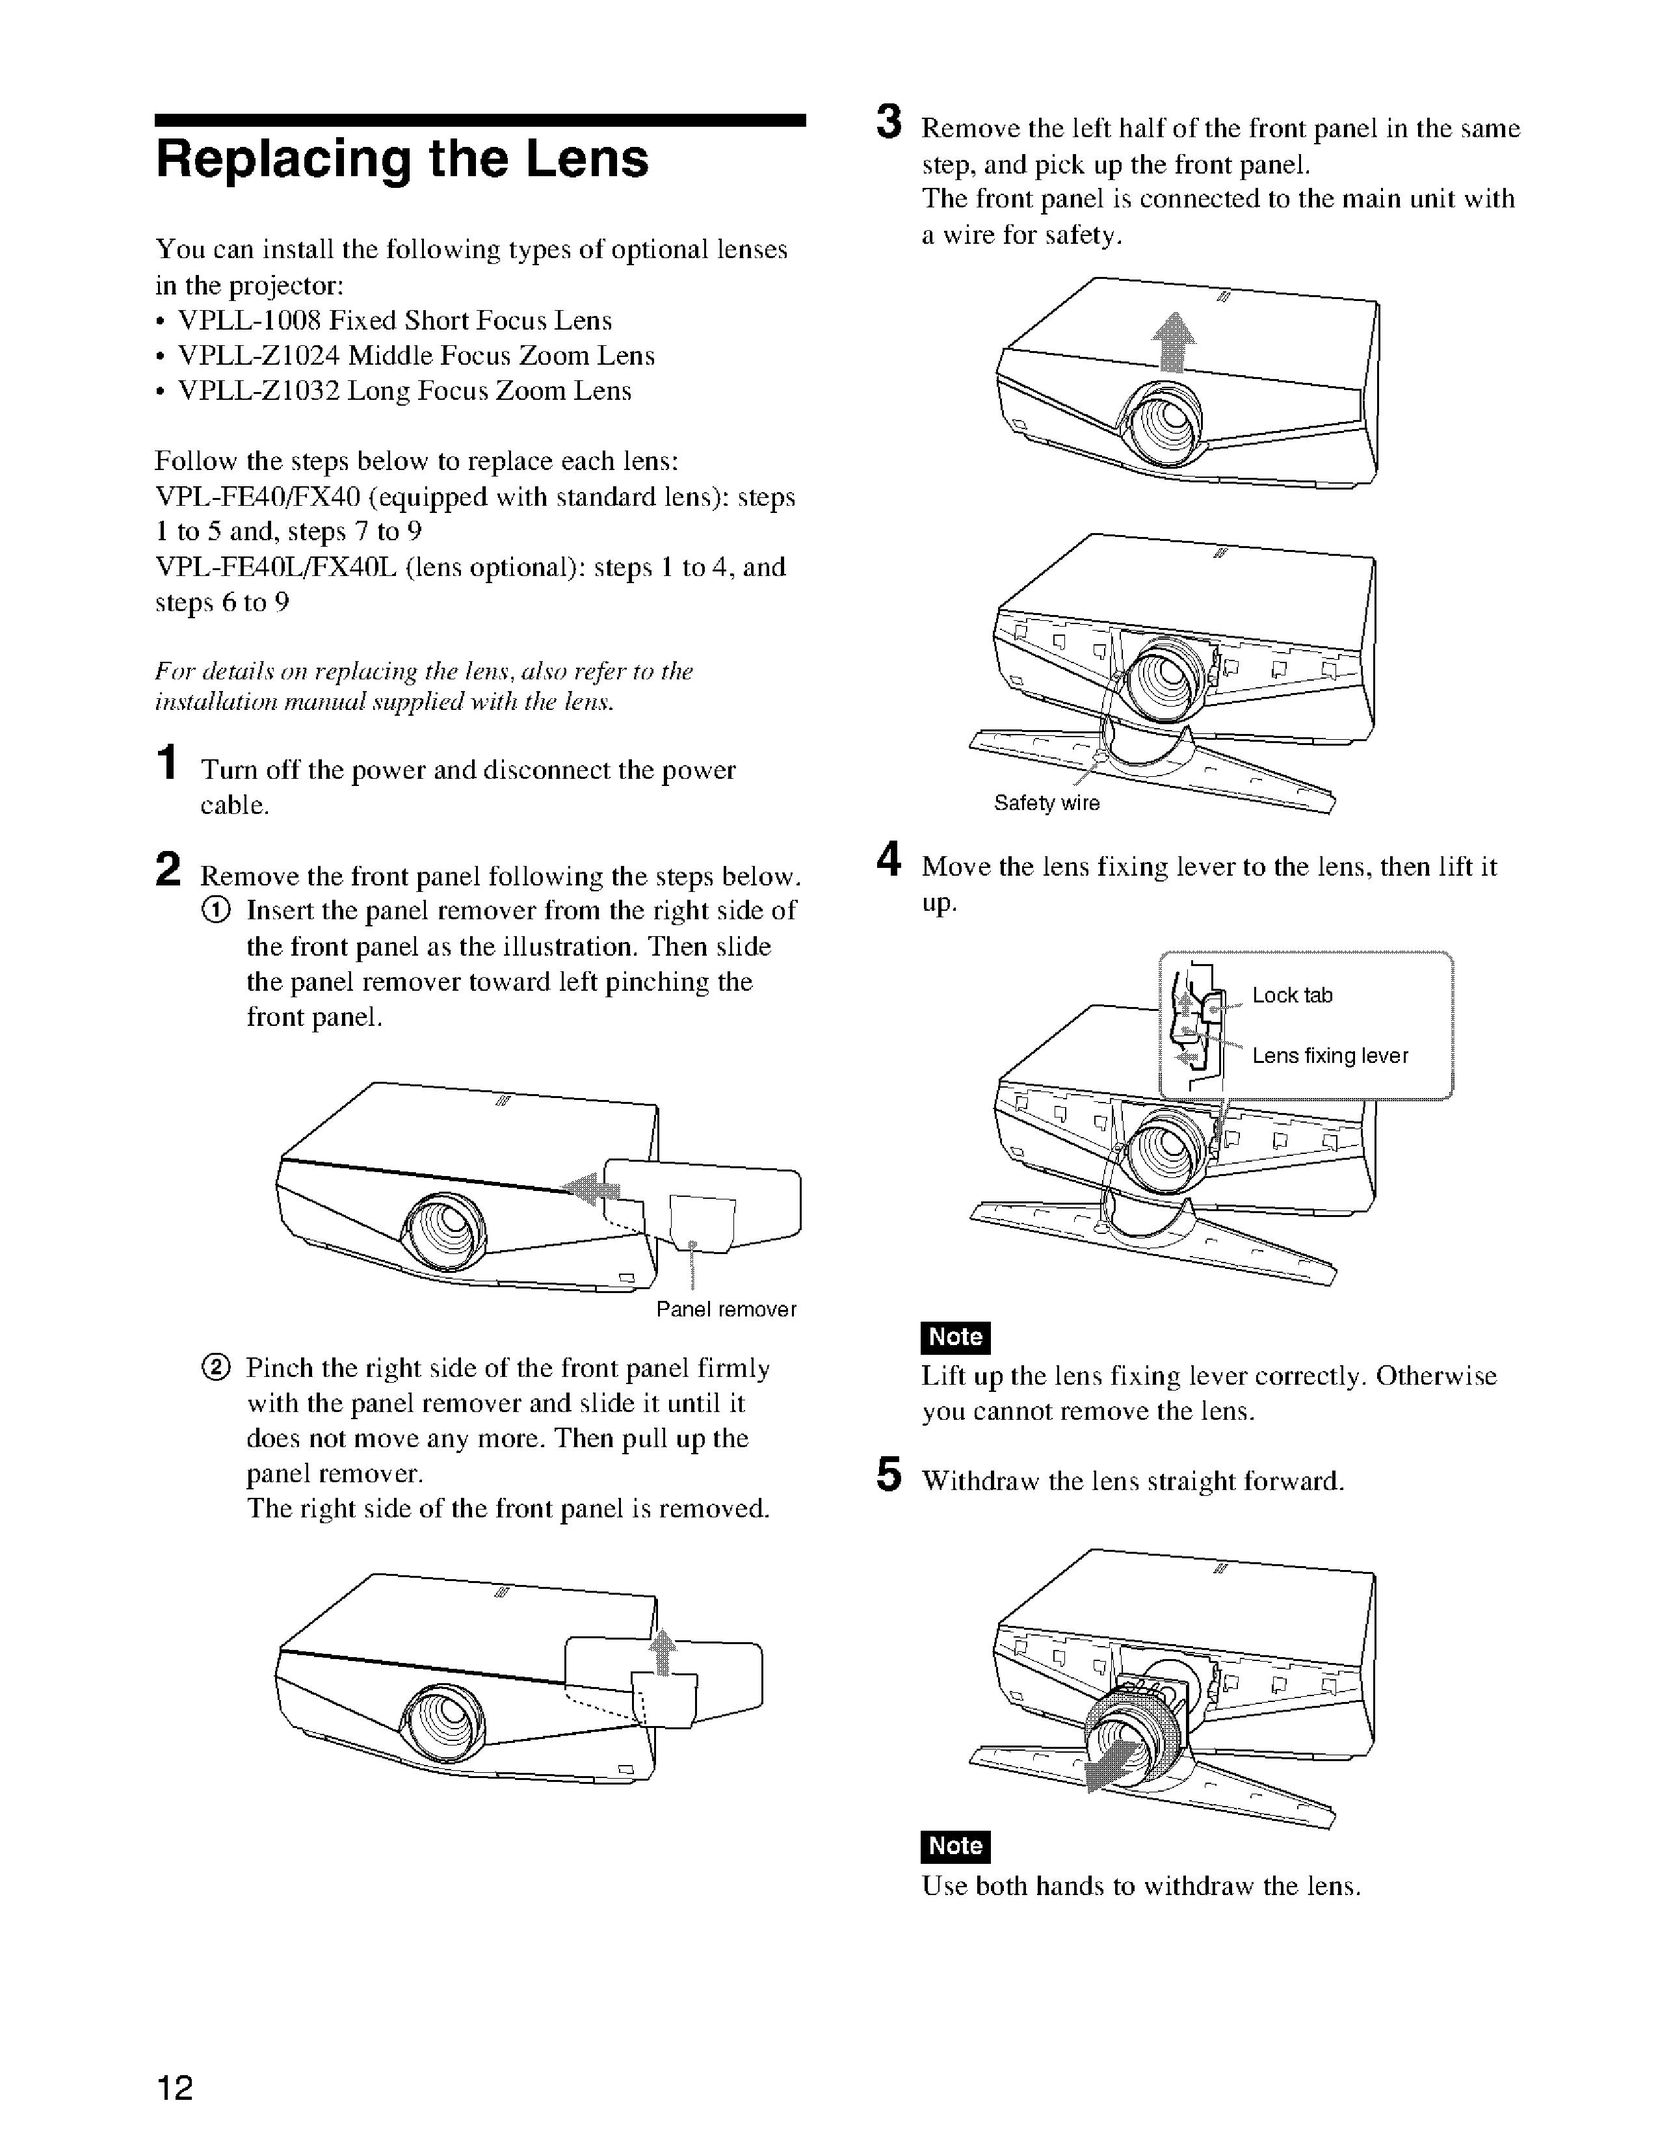 Sony VPLL-Z1032 Projector Accessories User Manual